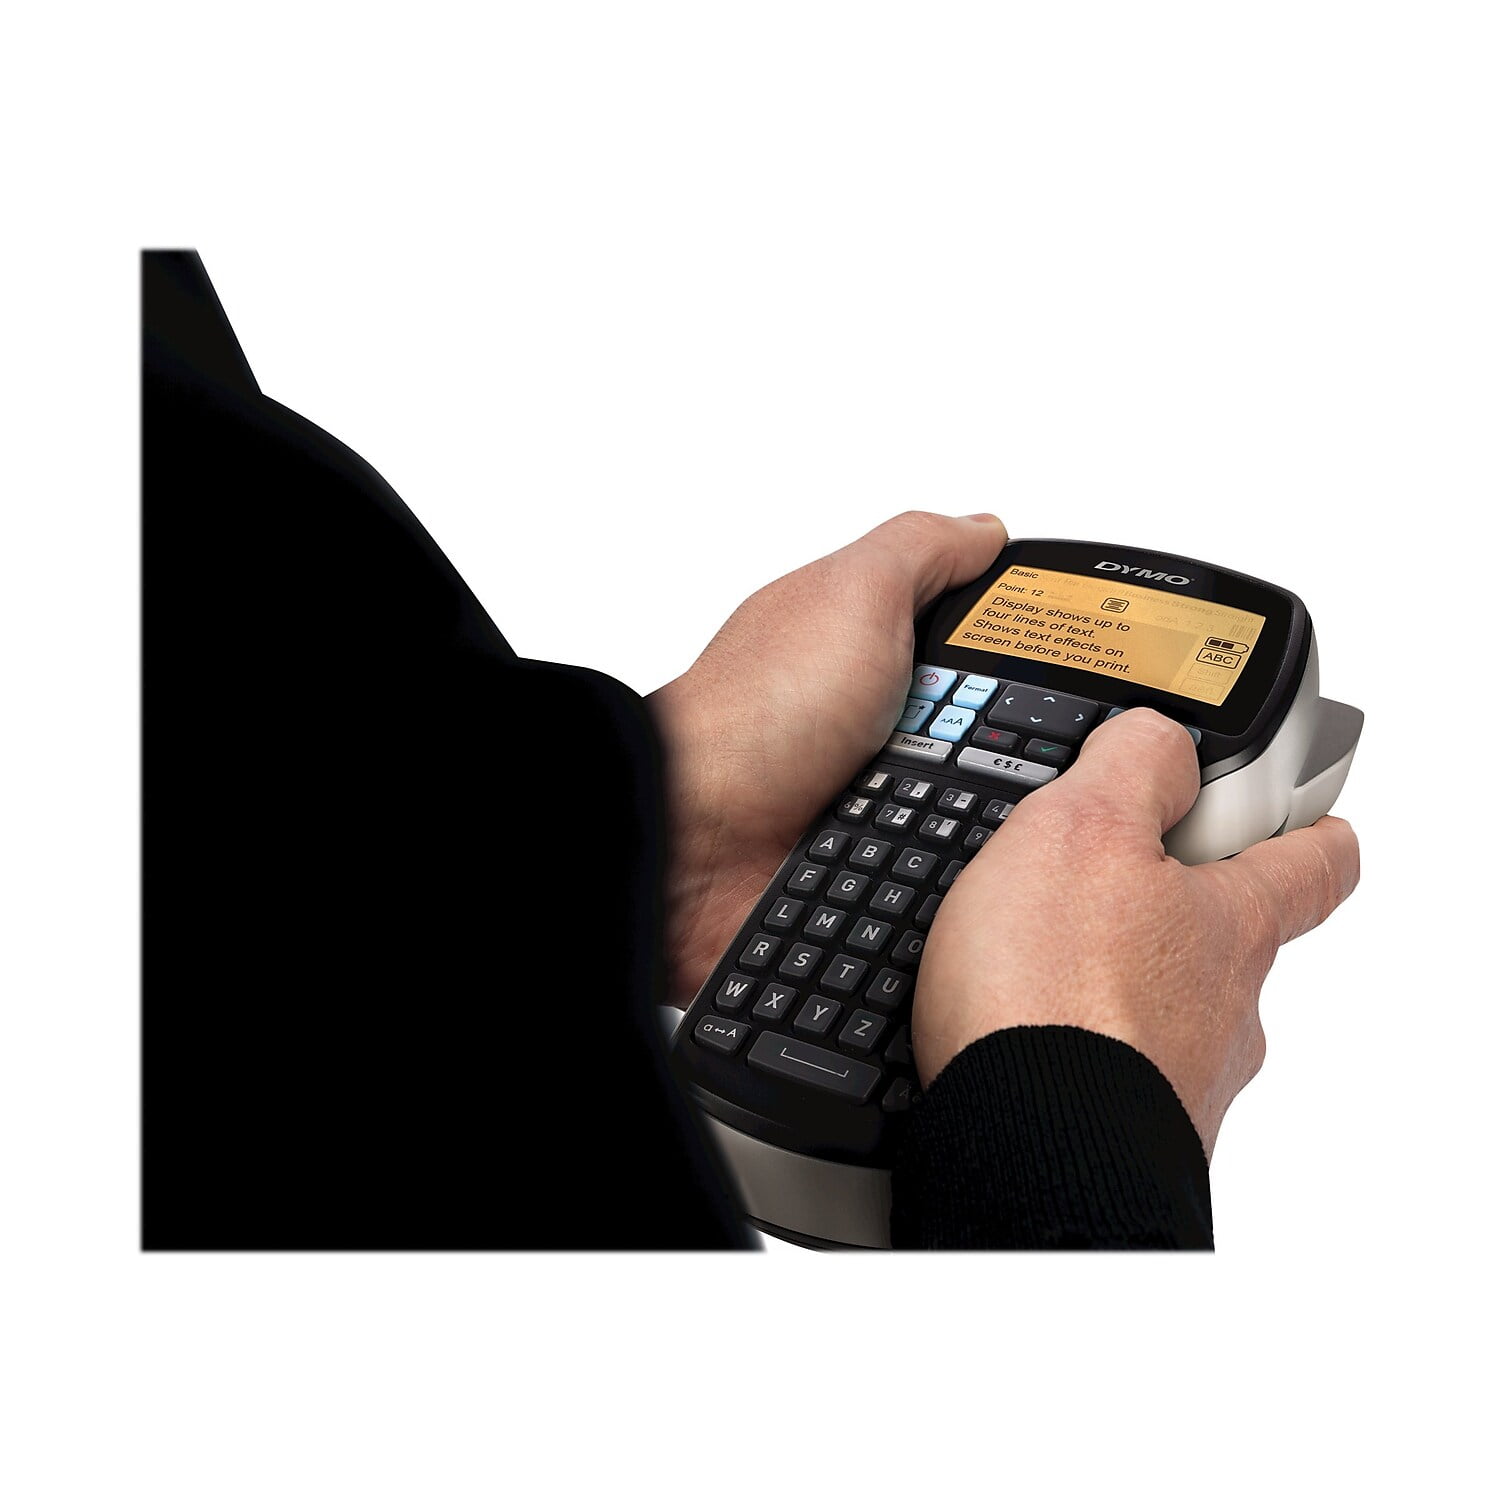 Dymo Label Maker, LabelManager 420P - Free Shipping